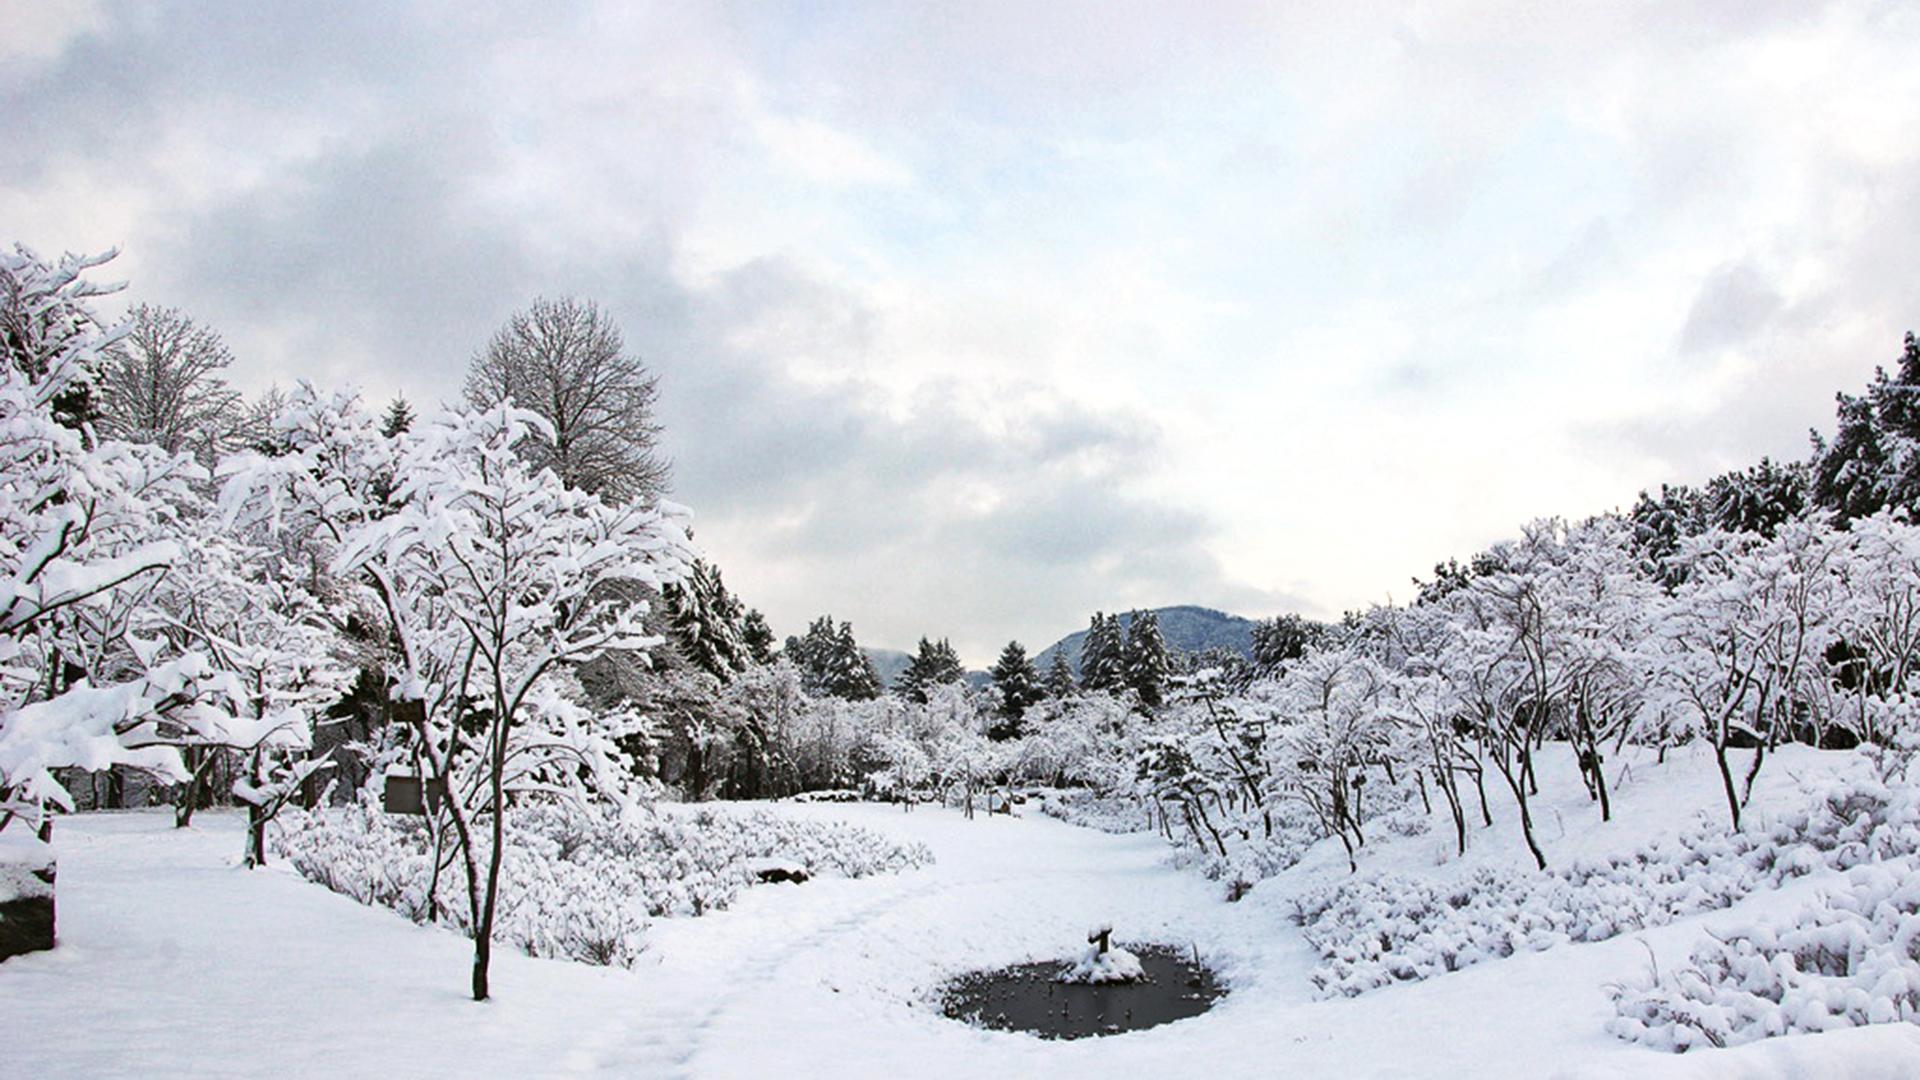 scenic winter landscape of Namiseom Island's tranquil morning garden with snowy trees and plants against cloudy sky.